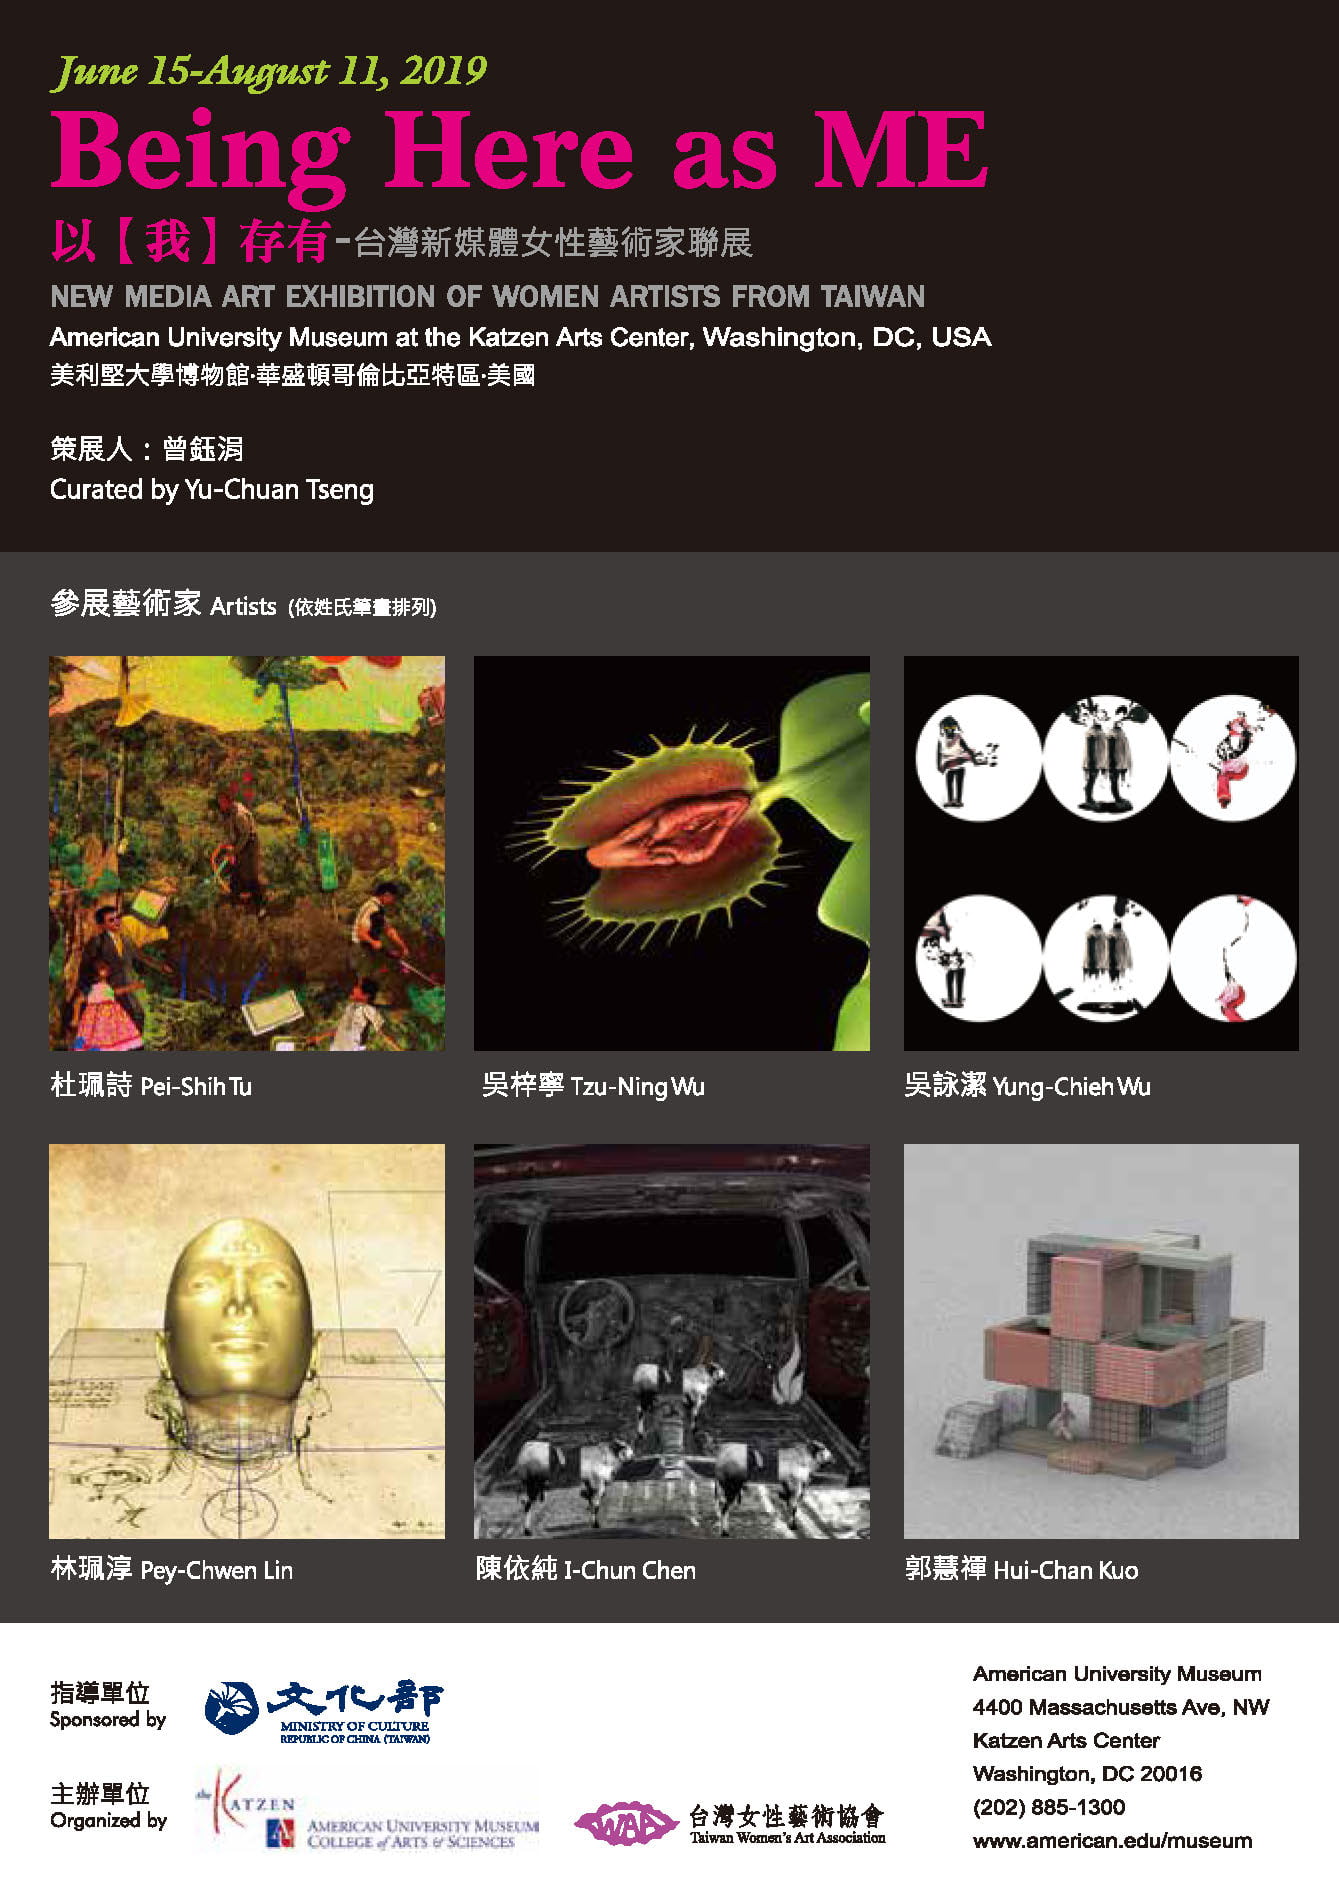 Being Here as ME: New Media Art Exhibition of Women Artists from Taiwan